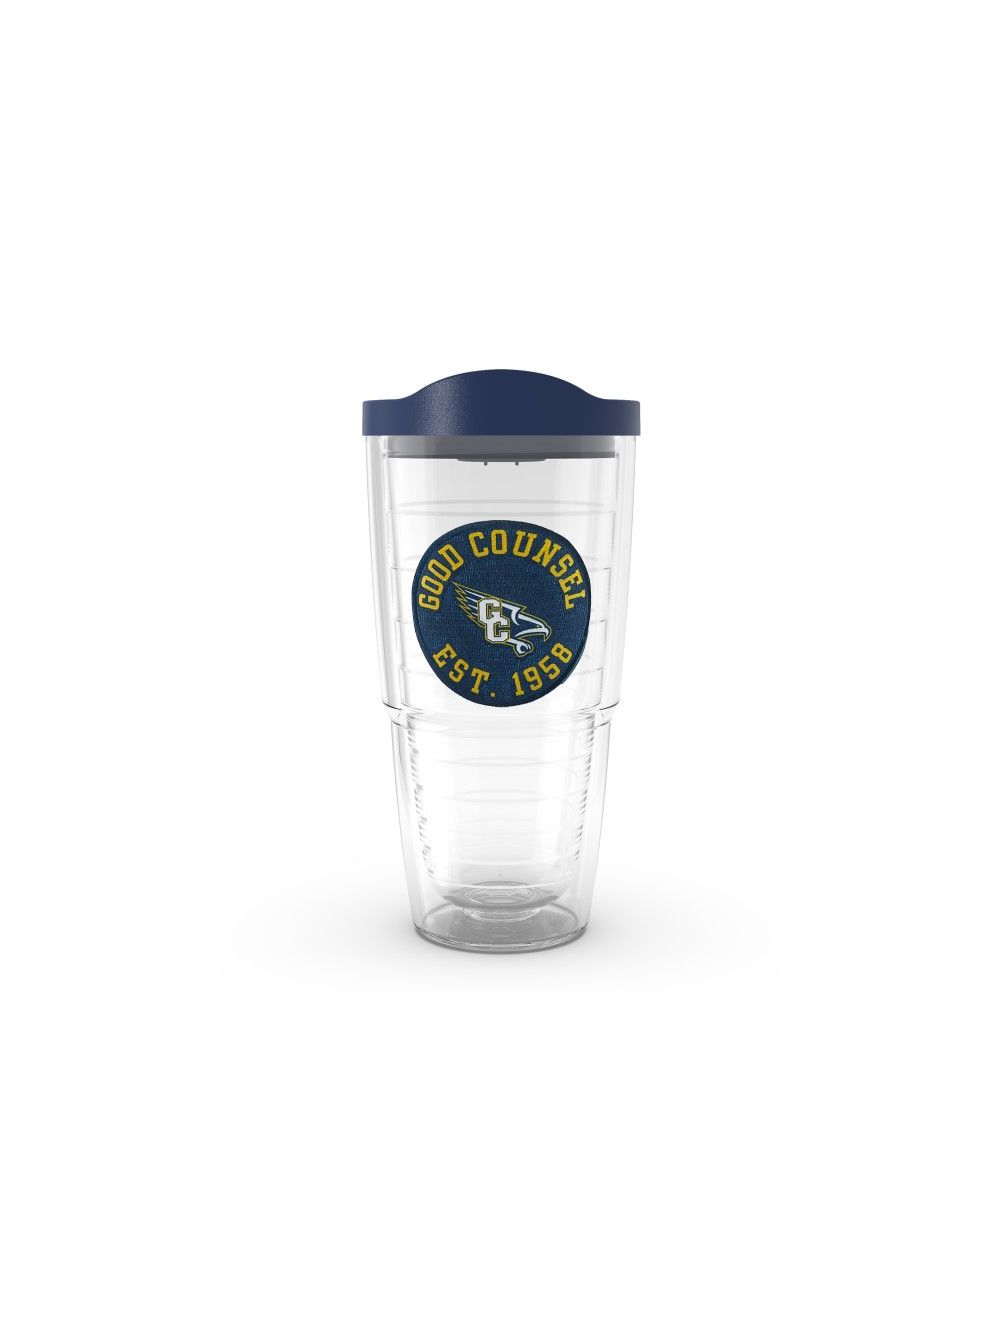 Tervis 24 oz. Tumbler with Sip-through Lid